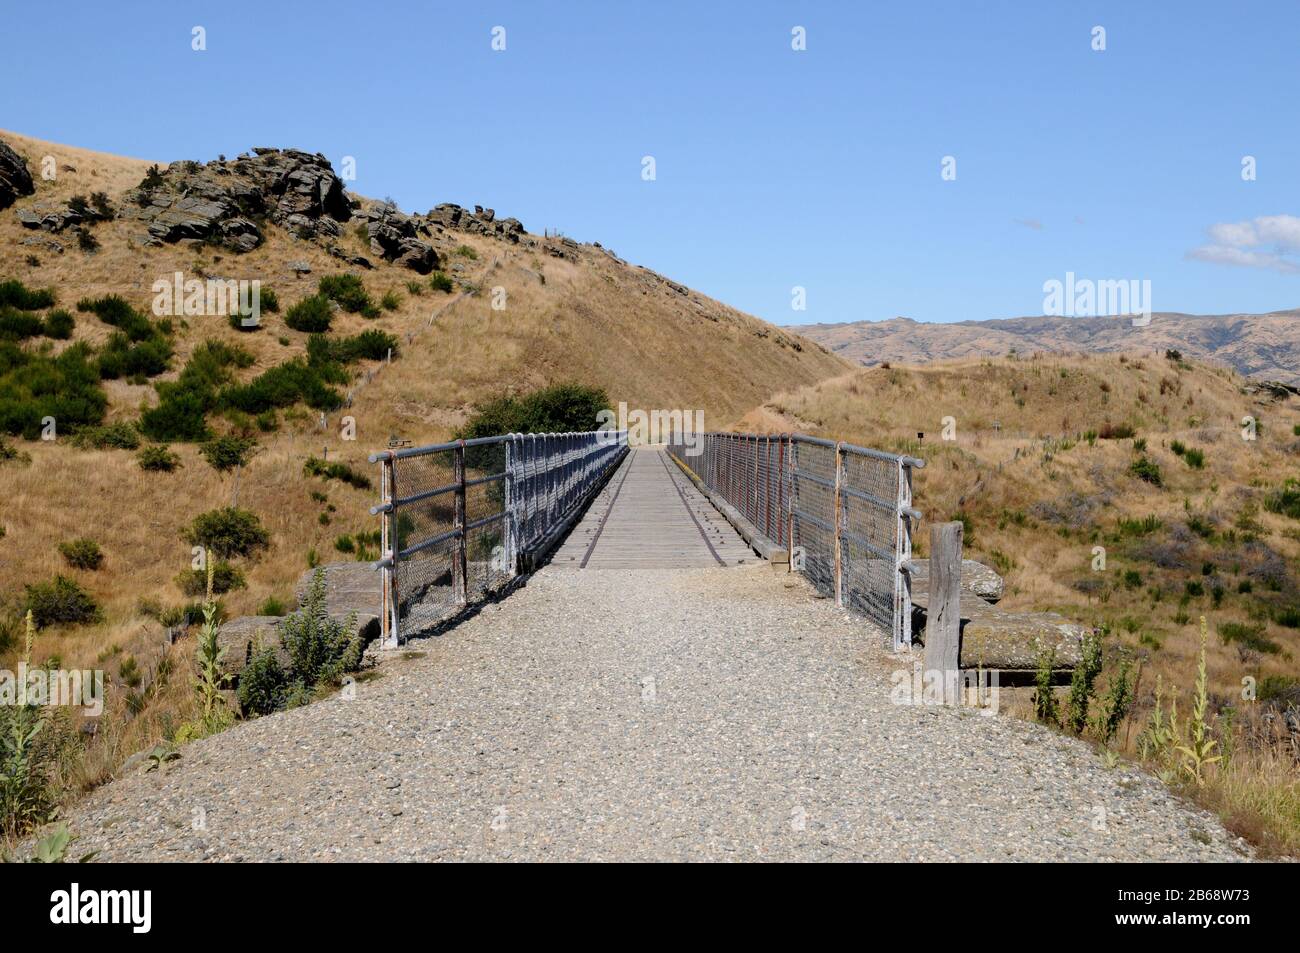 The Central Otago Rail Trail crosses a bridge over a gorge near the township of Lauder. The Trail is a multi day cycle ride or hike. Stock Photo